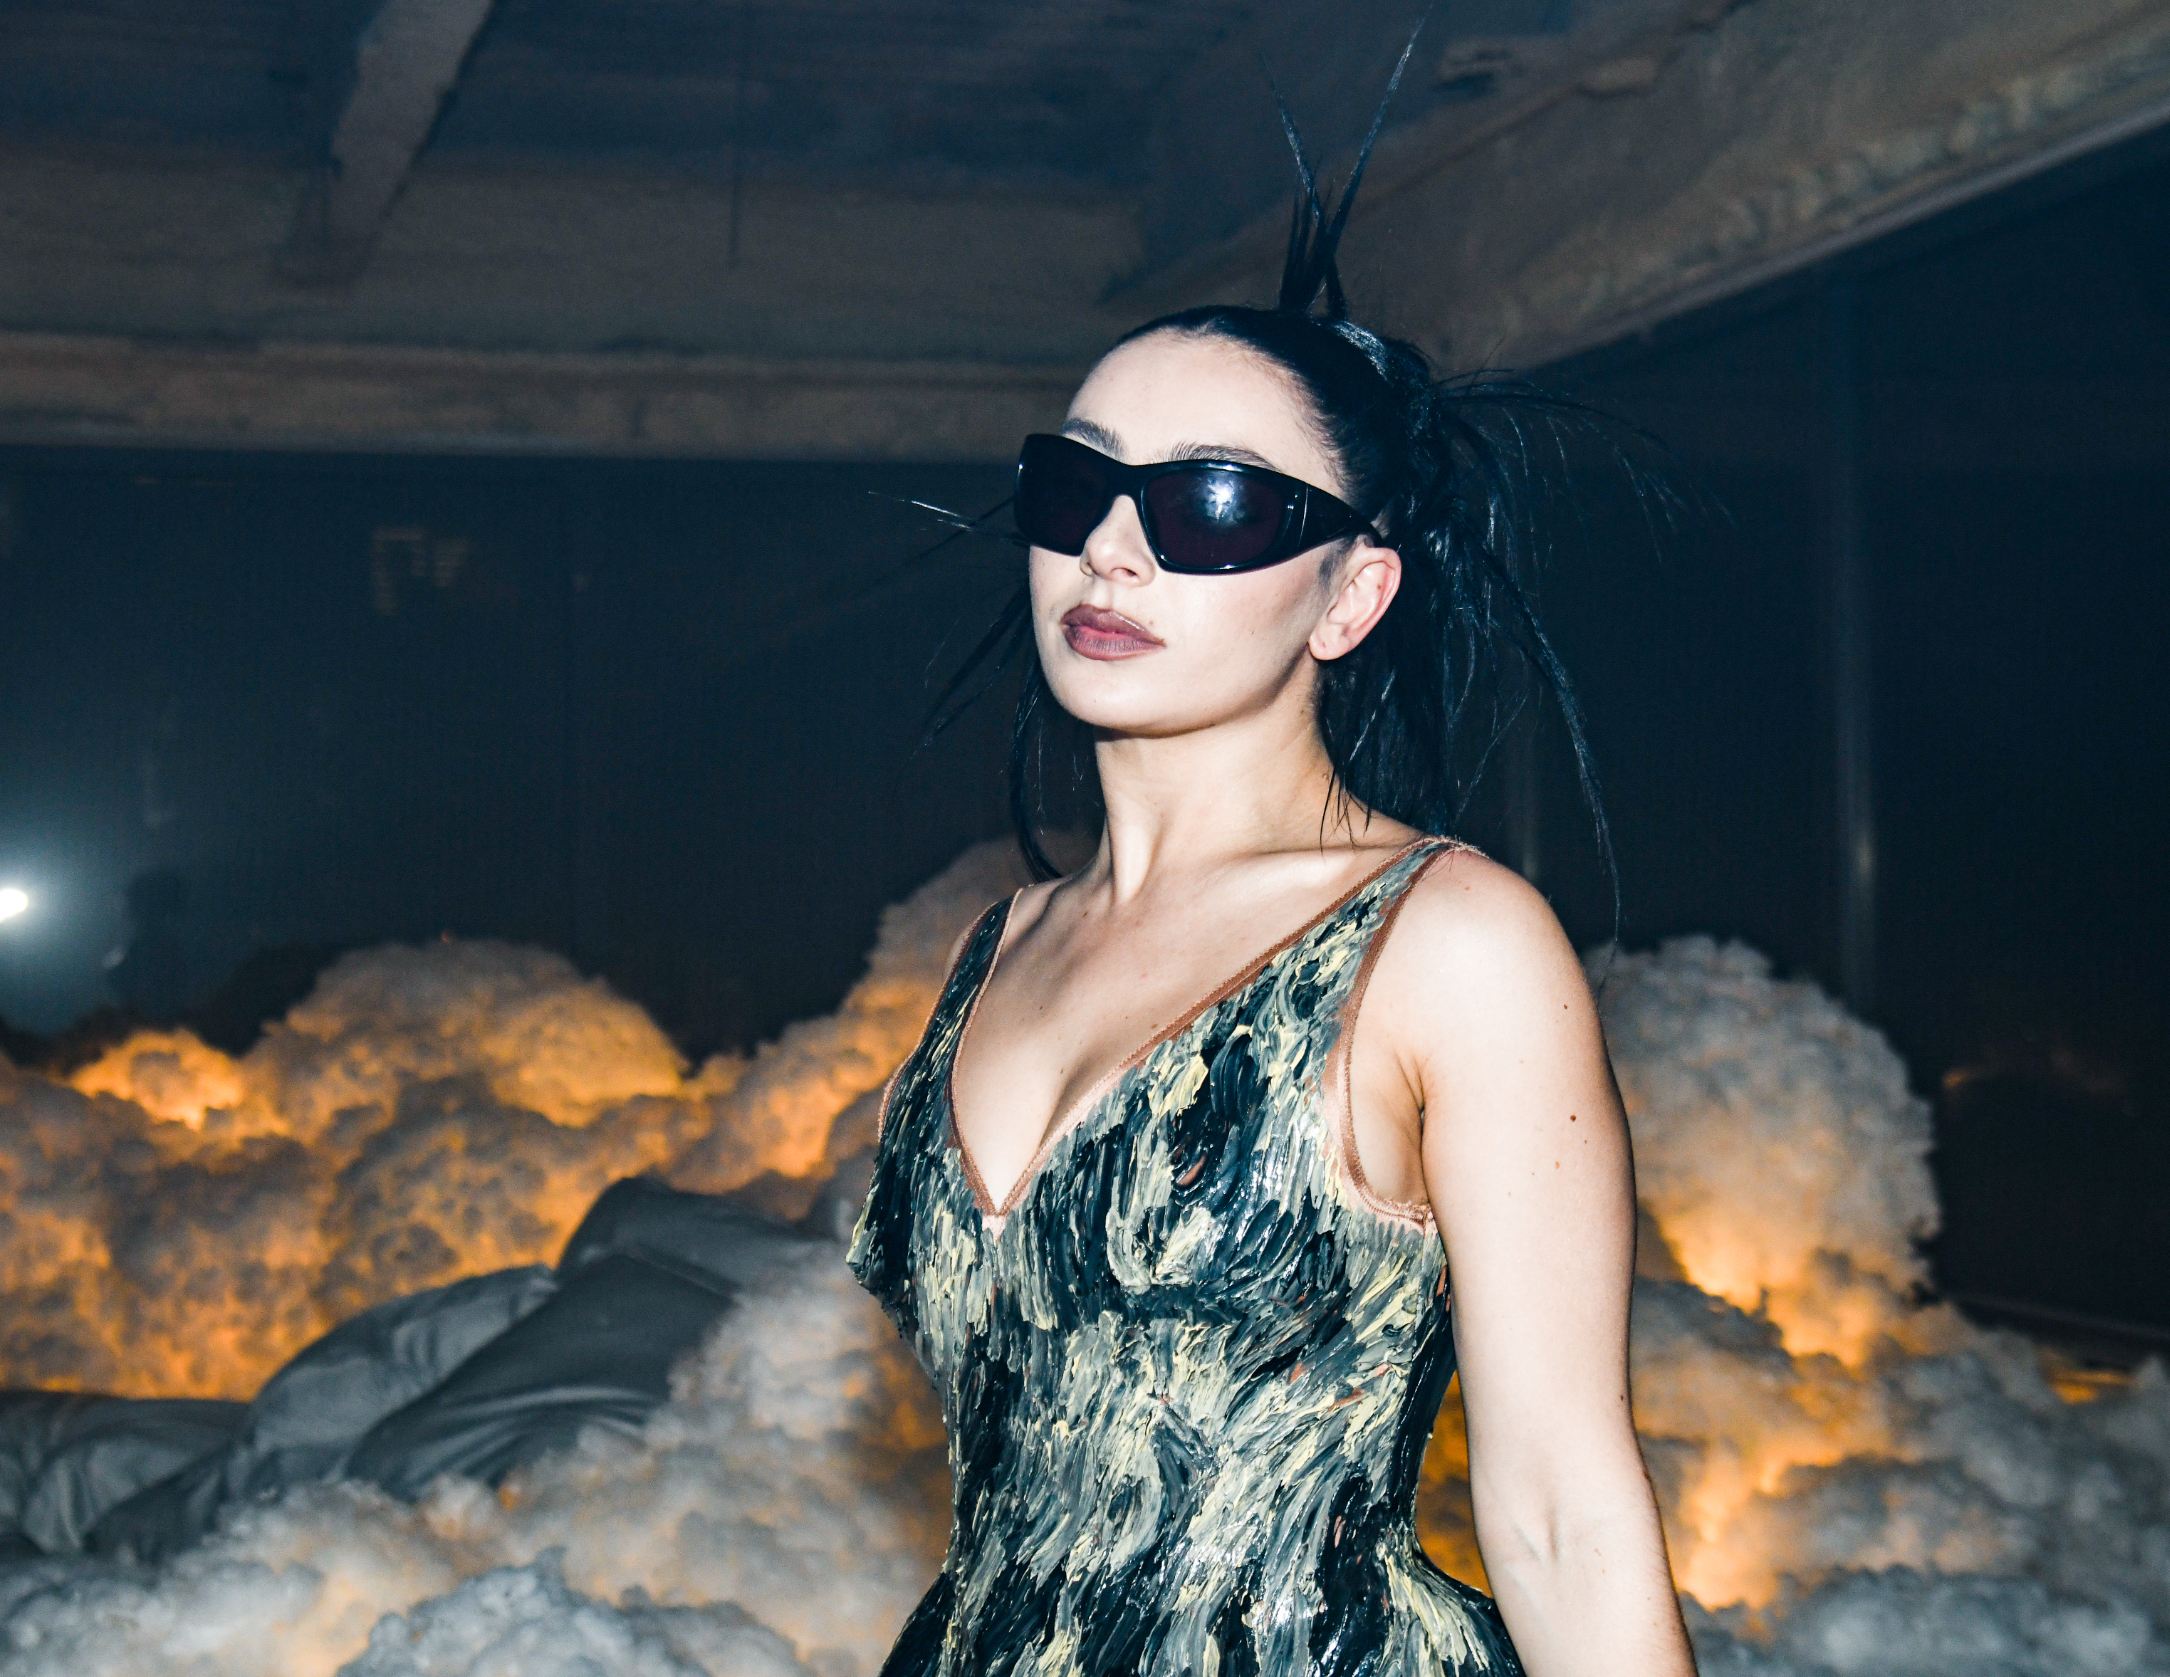 Charli XCX wearing a modern, artistic dress with black sunglasses and spiky hair, posing indoors with a cloud-like backdrop